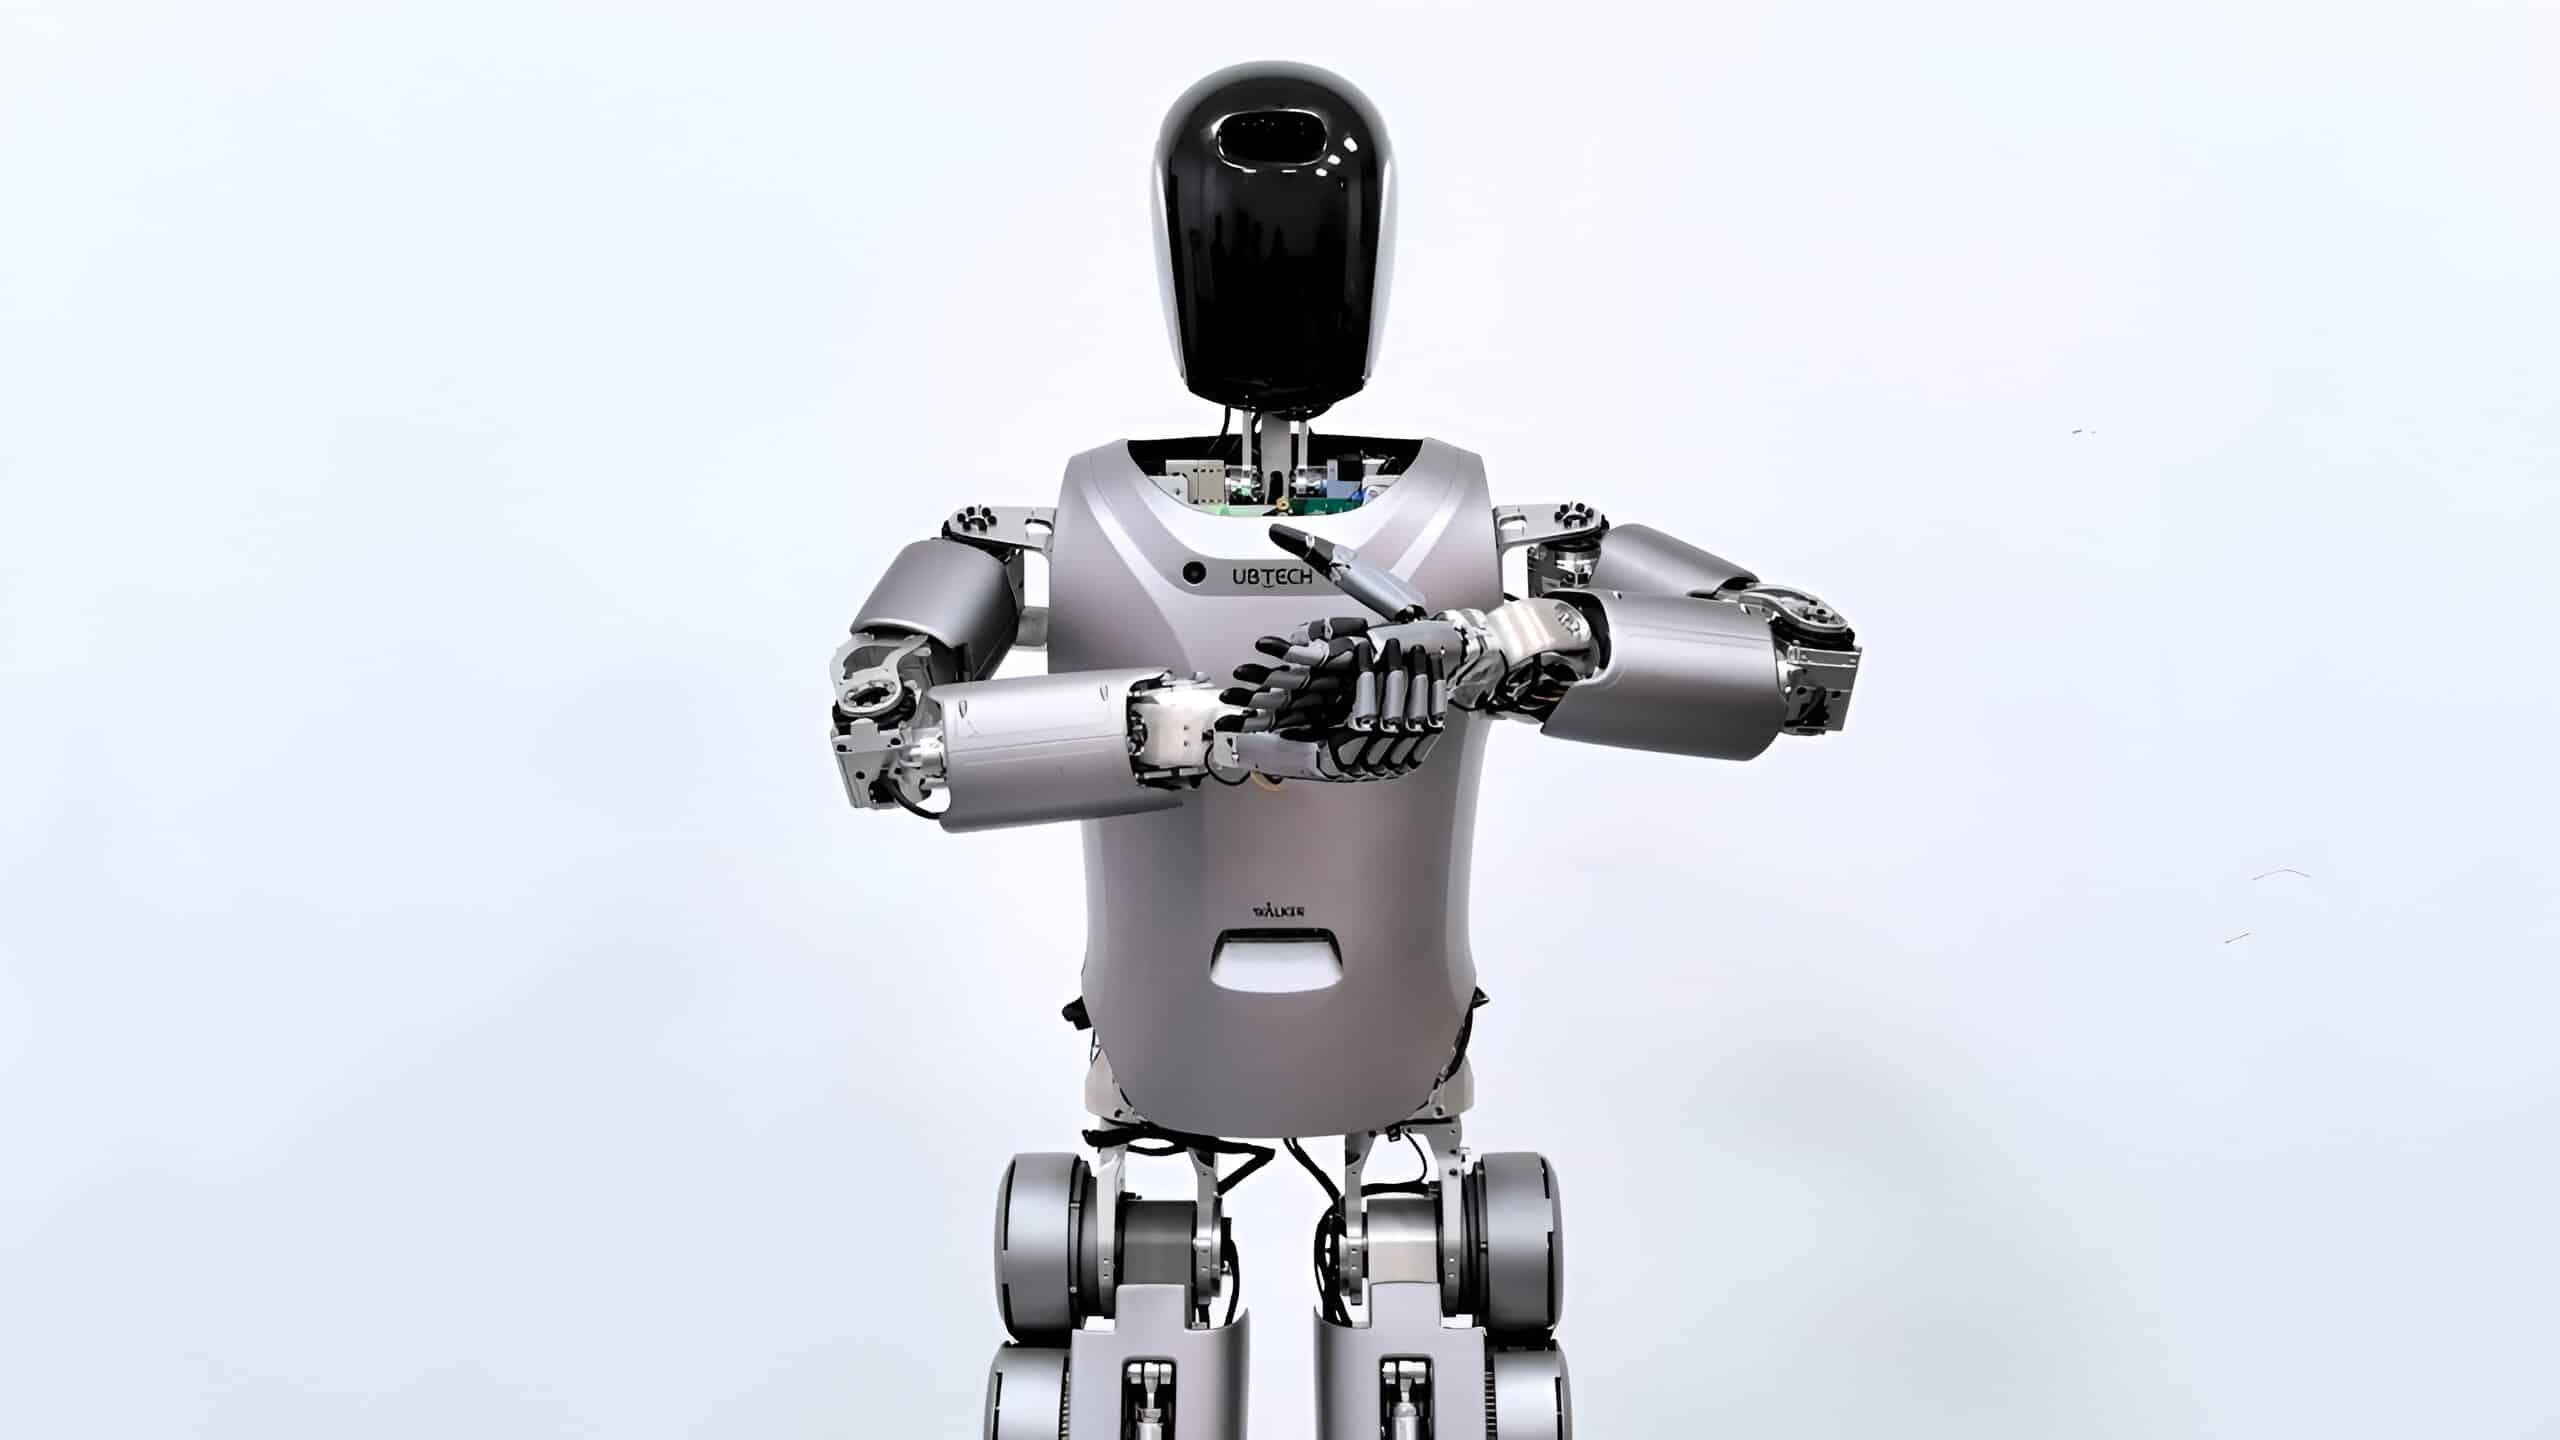 Dongfeng Motor integrates Walker S humanoid robots into the automotive manufacturing process